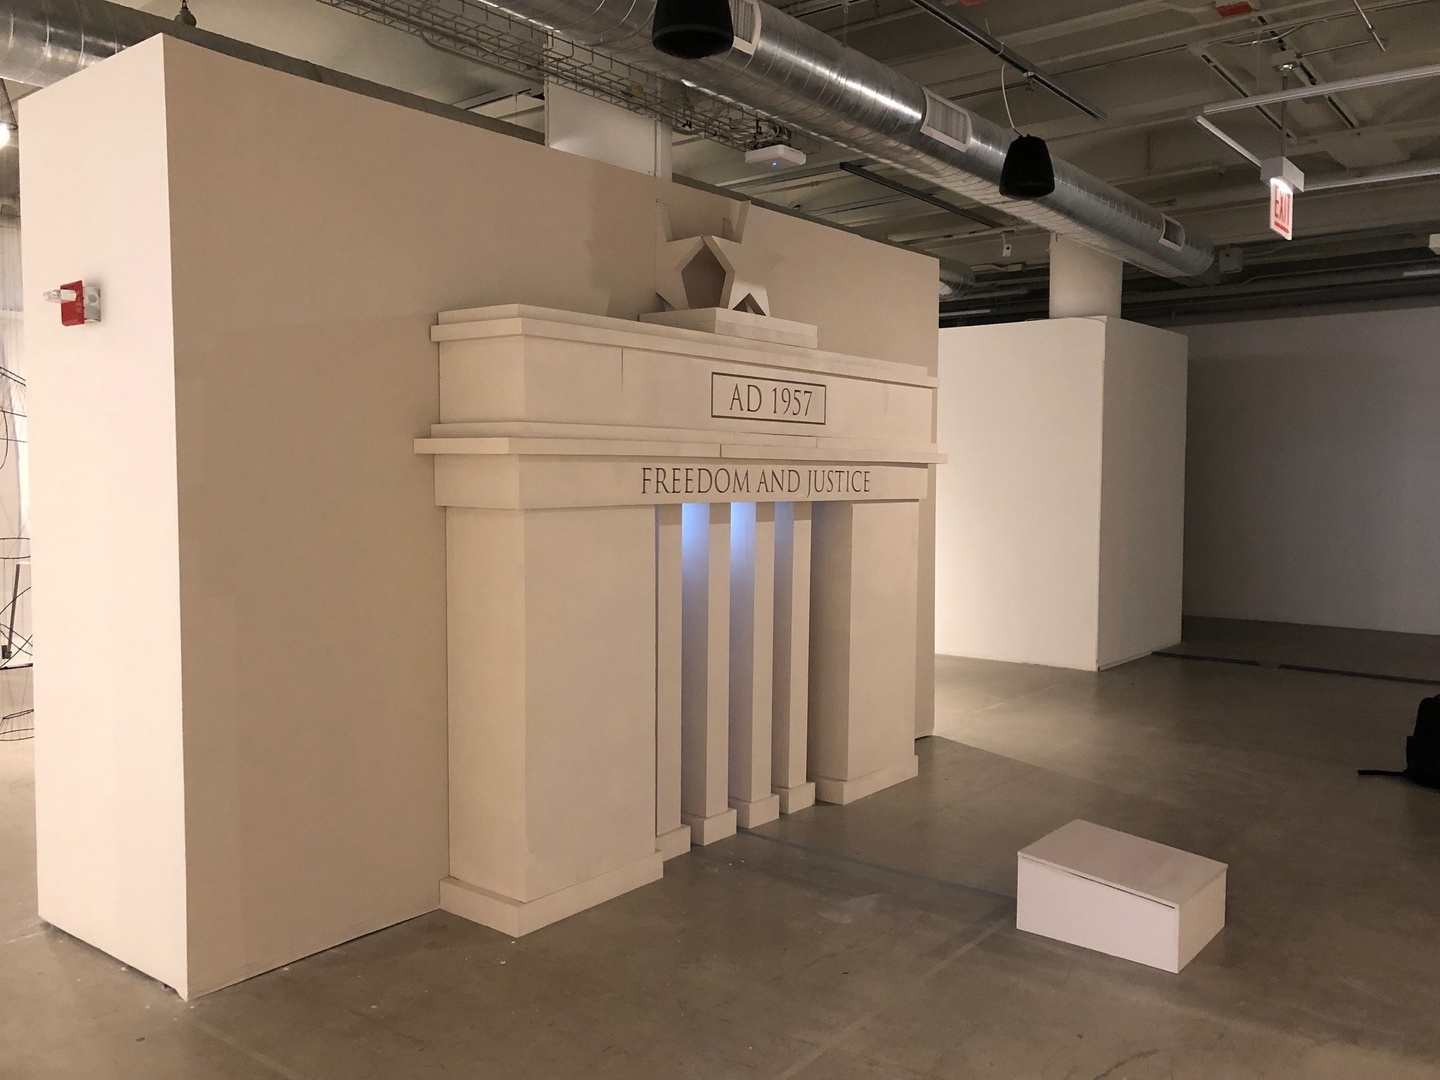 Sculptural installation set against a white wall, featuring a white building entrance, with skinny white pillars in the front opening. The inscription AD 1957 is at the top, and under it, Freedom and Justice.